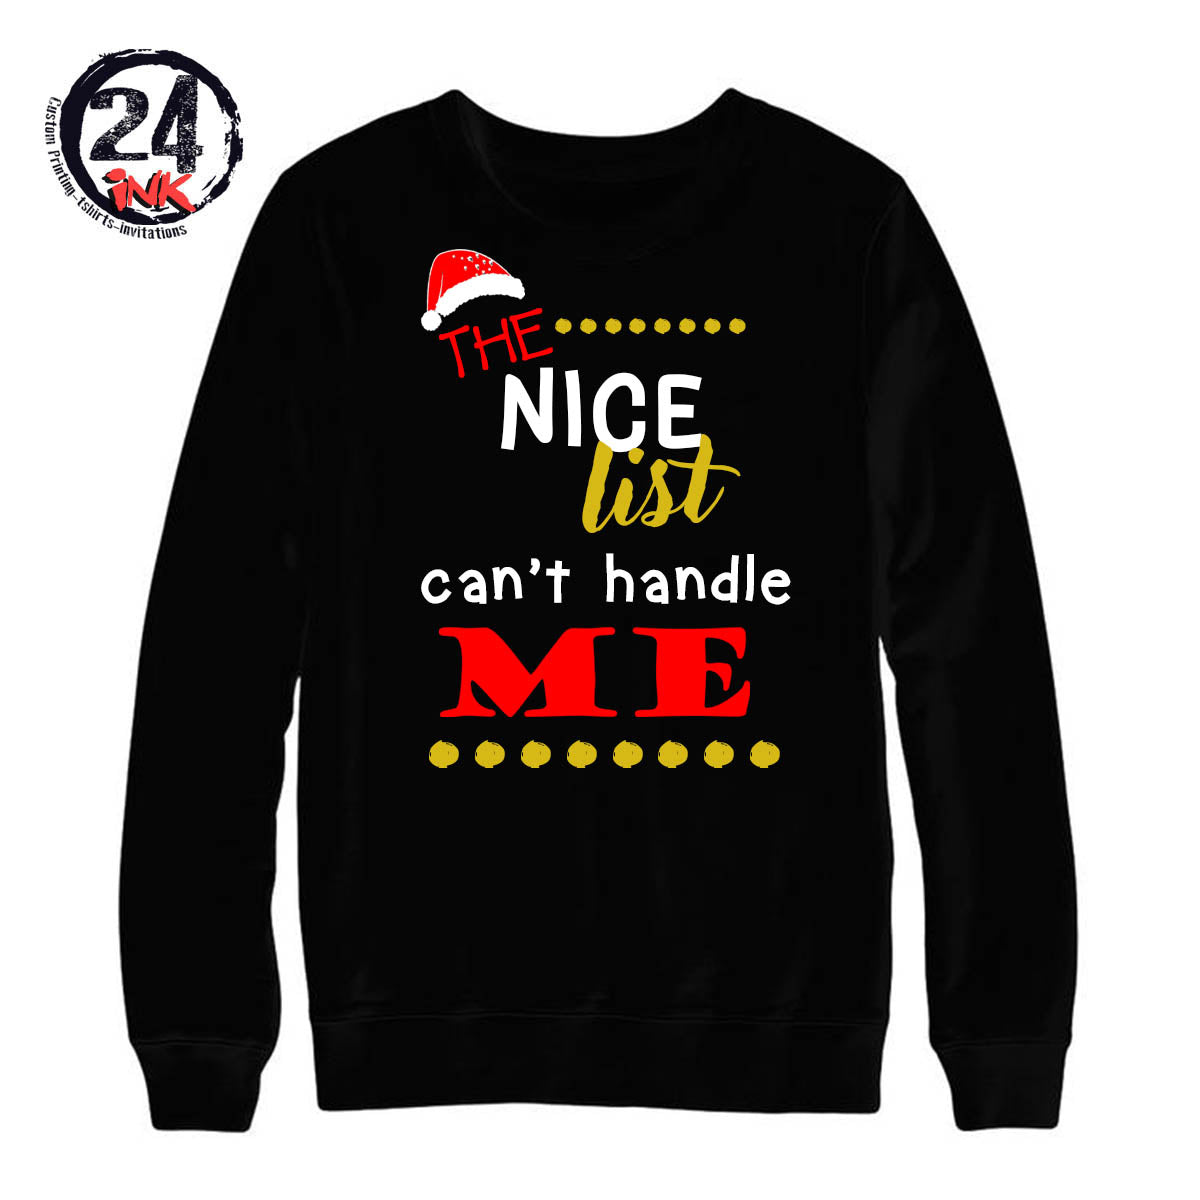 The nice list can't handle me non hooded sweatshirt